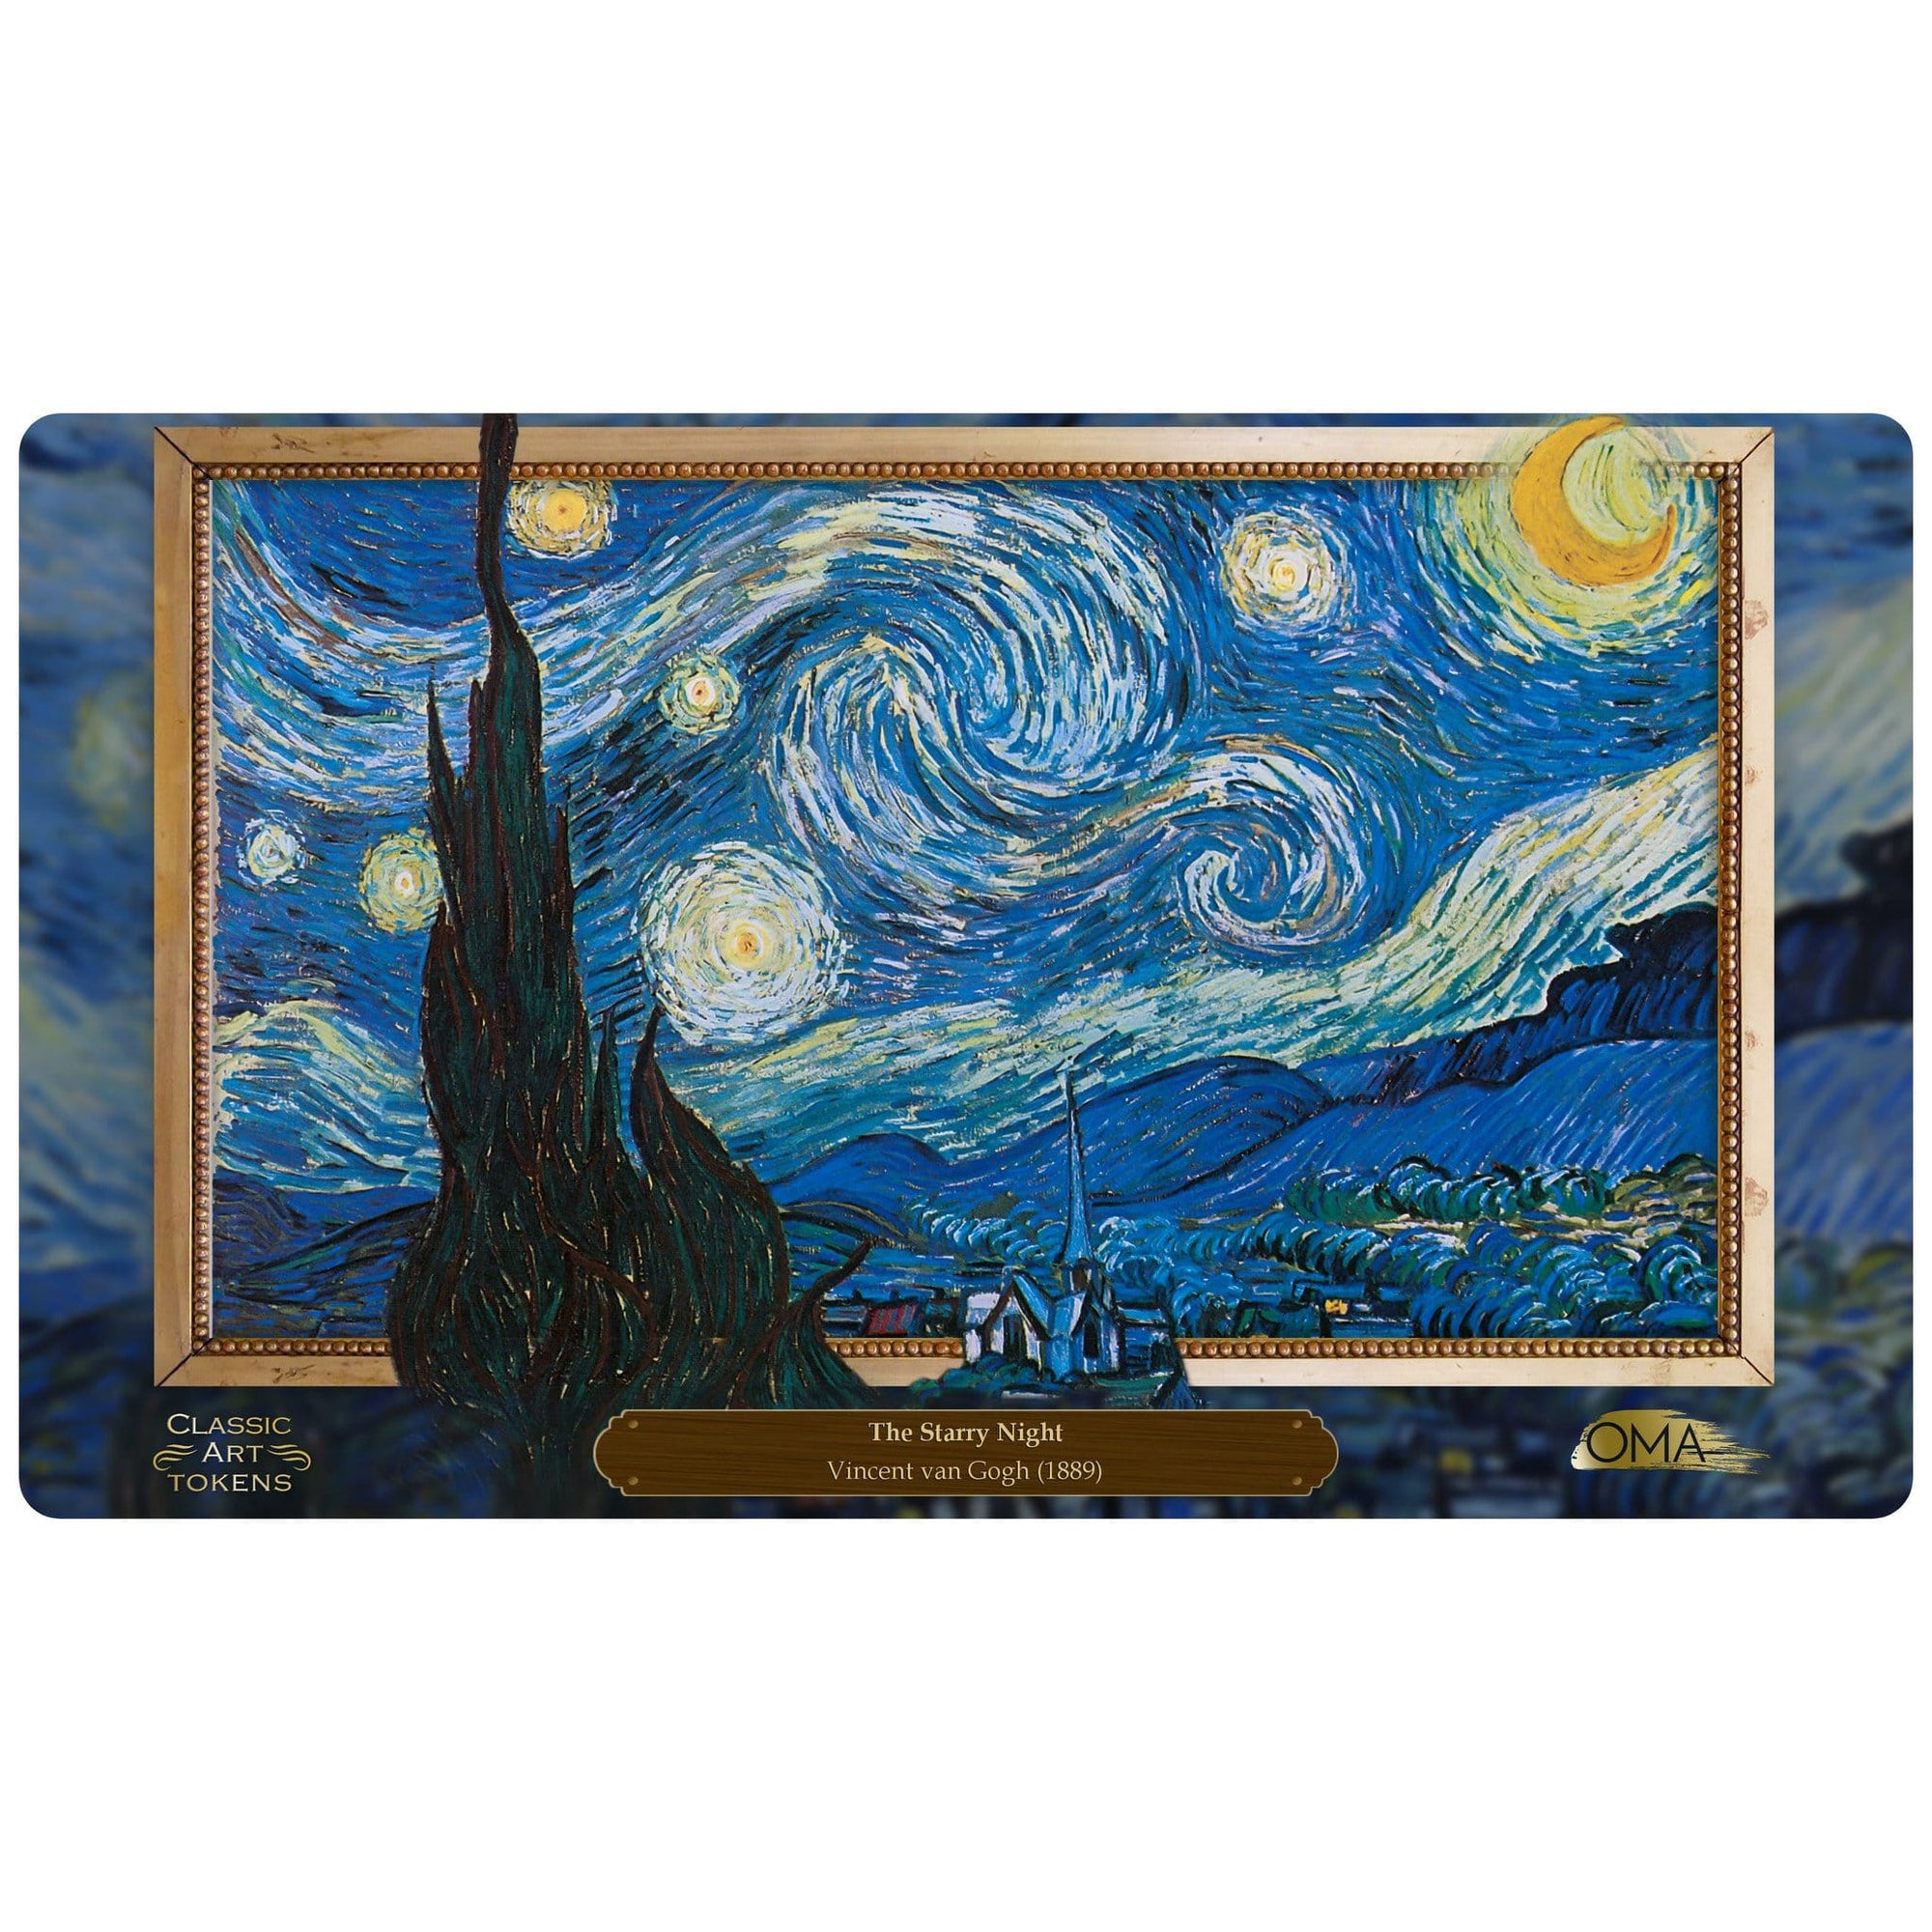 Emblem Playmat by Vincent van Gogh - Playmat - Original Magic Art - Accessories for Magic the Gathering and other card games